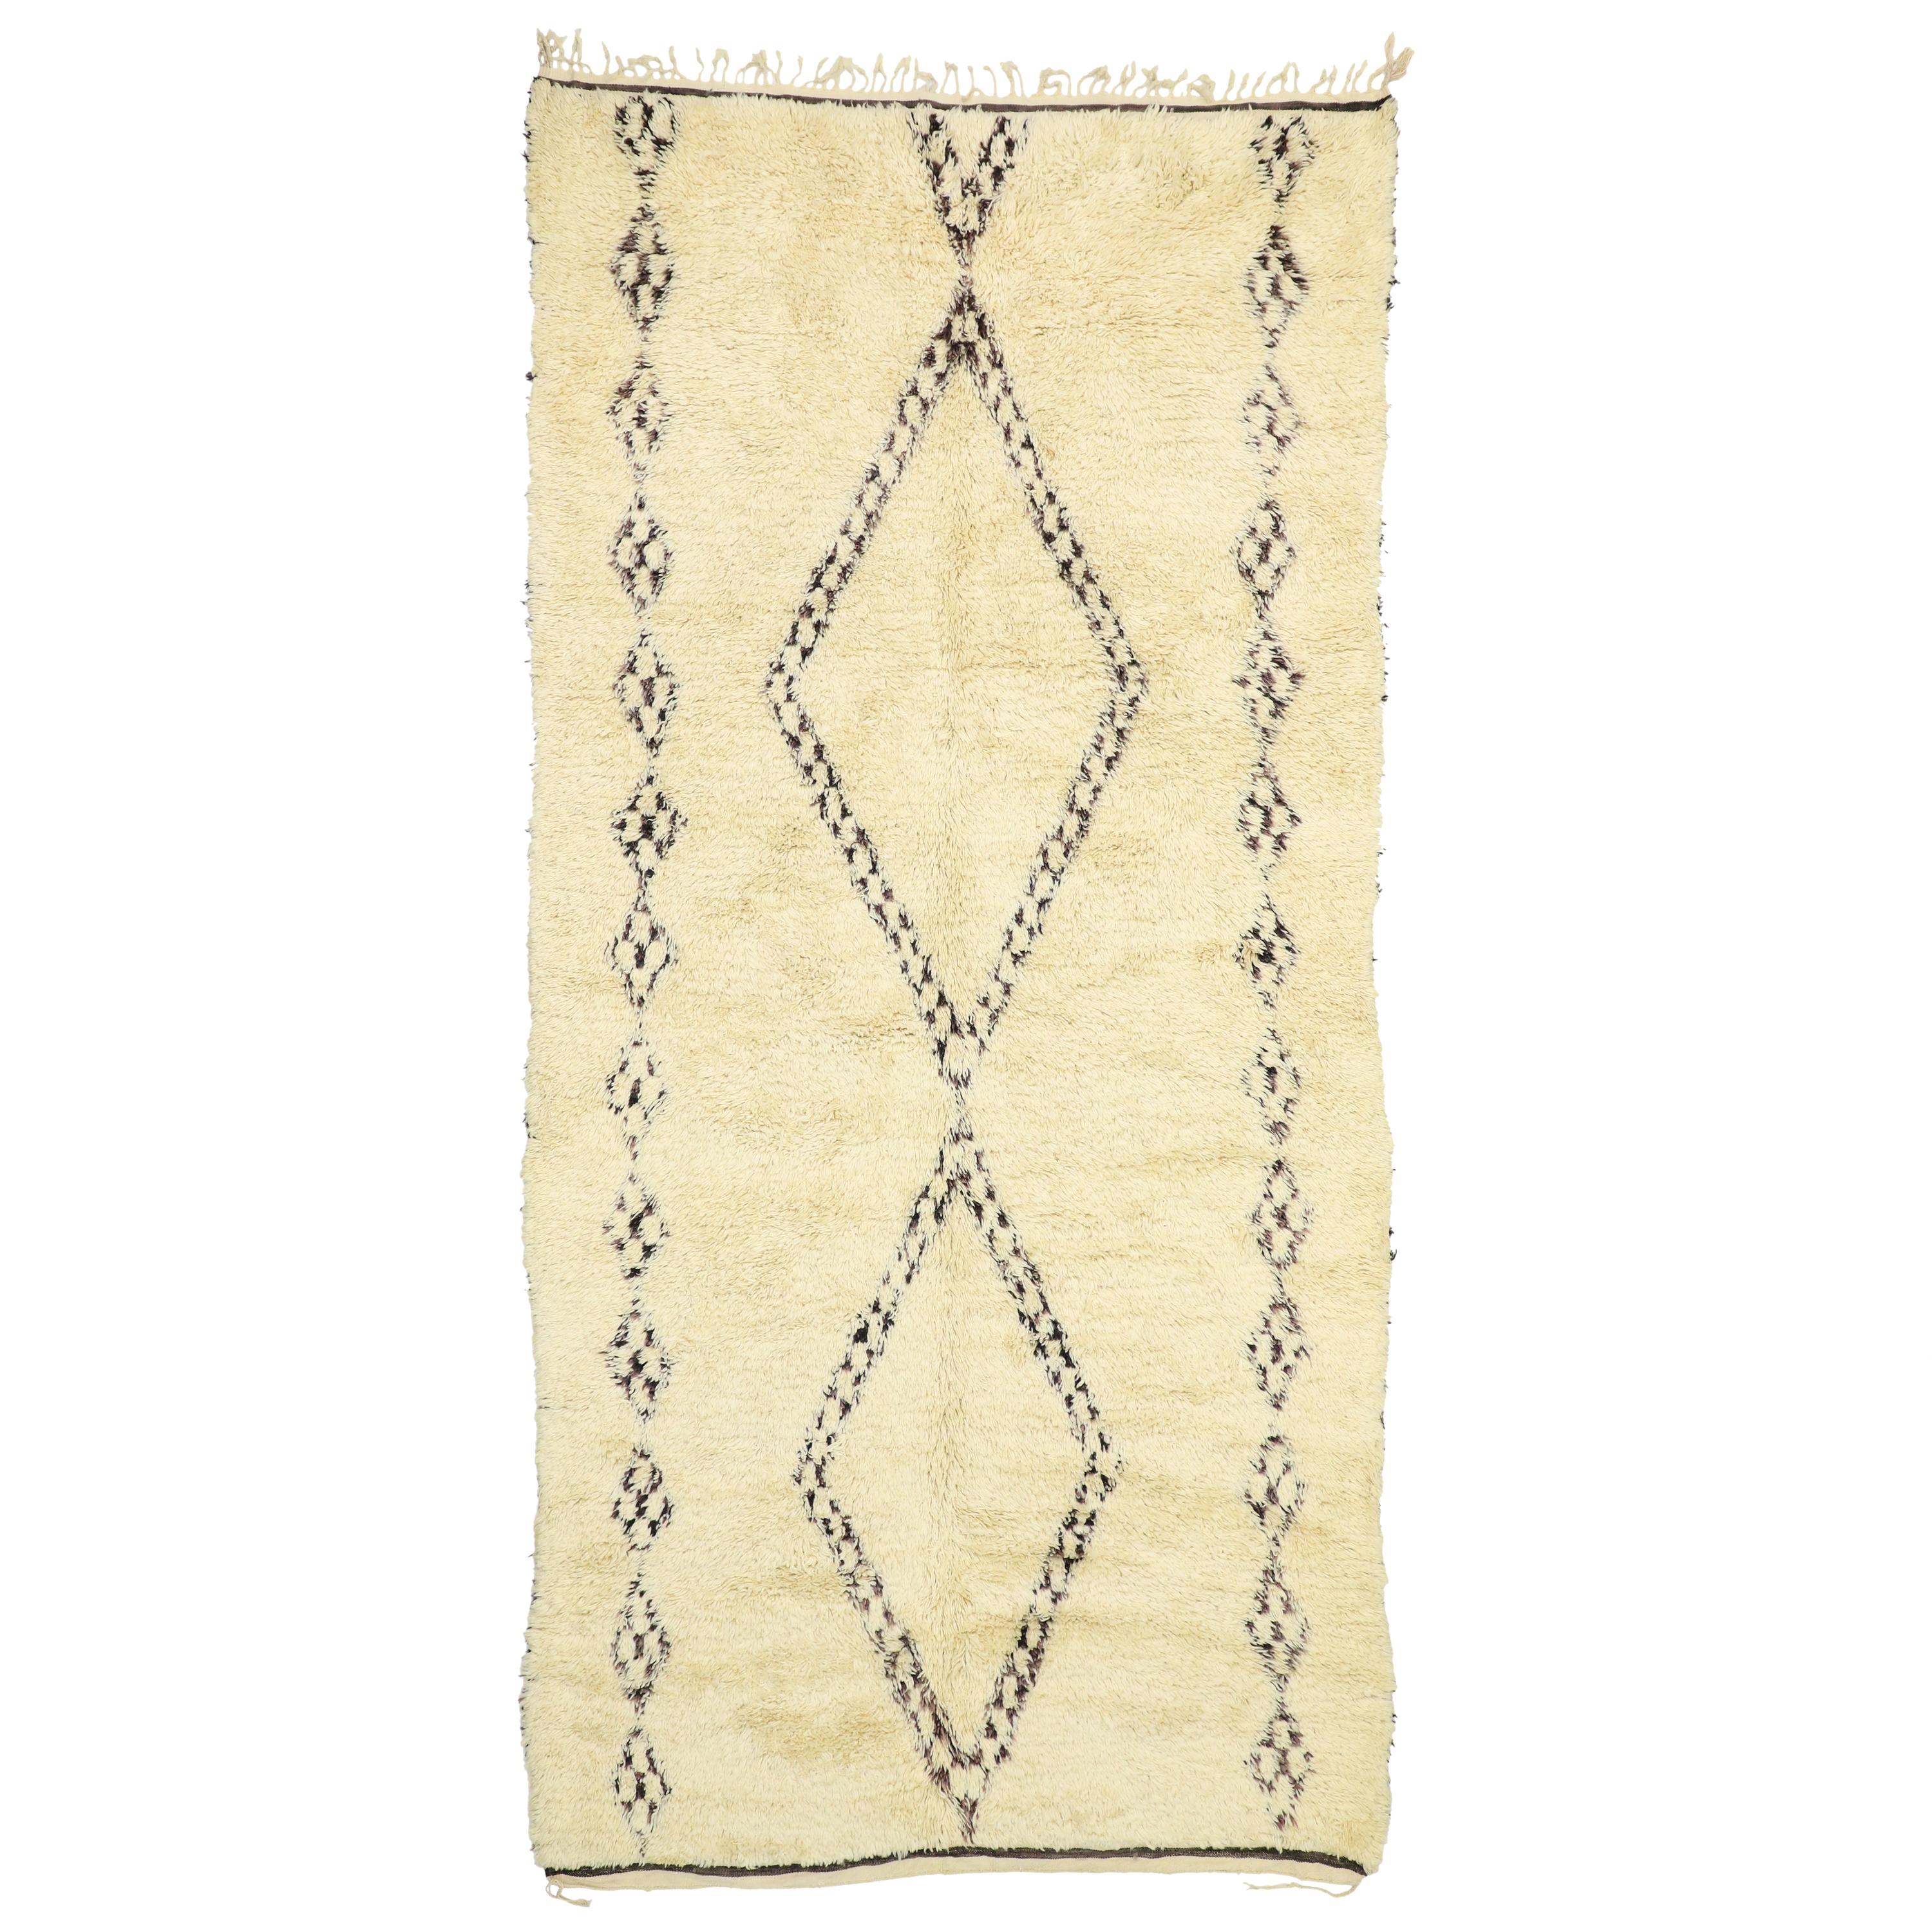 Contemporary Beni Ourain Moroccan Rug with Minimalist Style